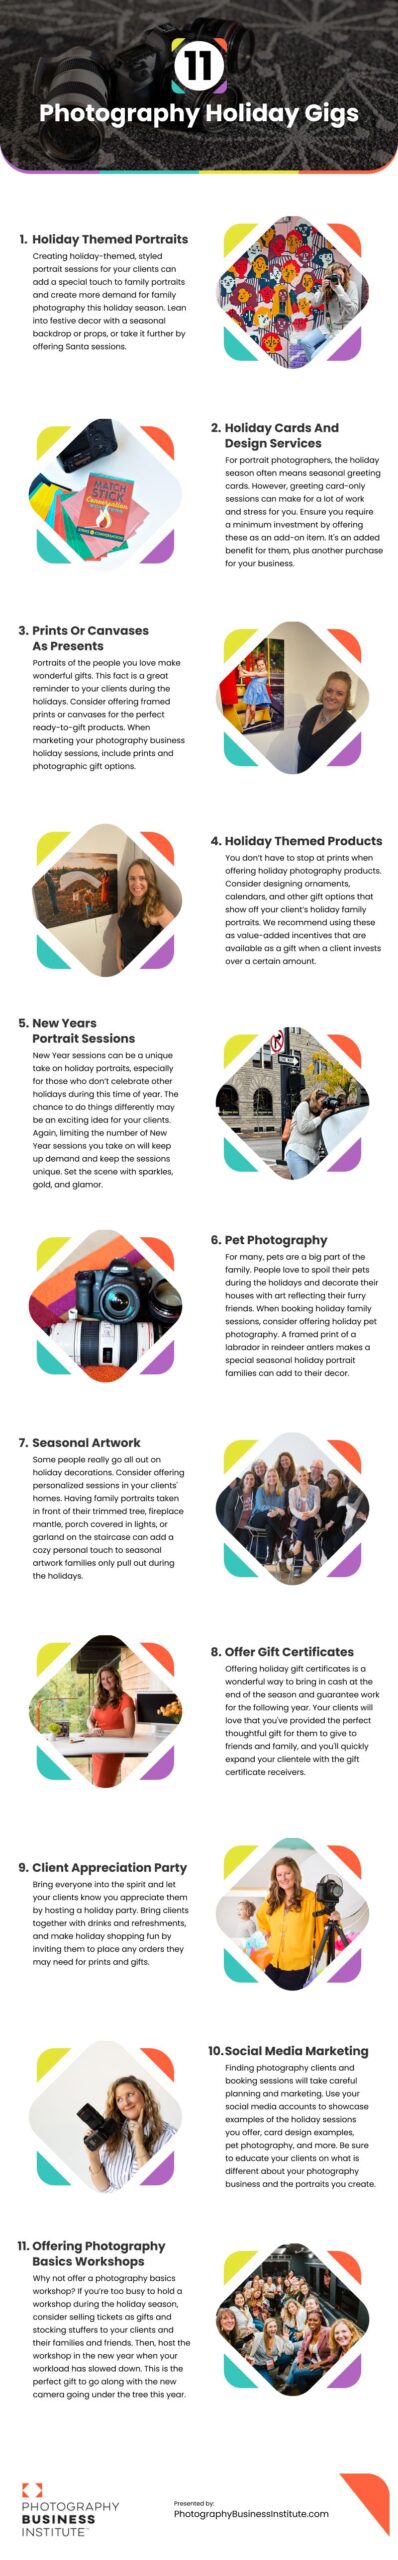 11 Photography Holiday Gigs Infographic